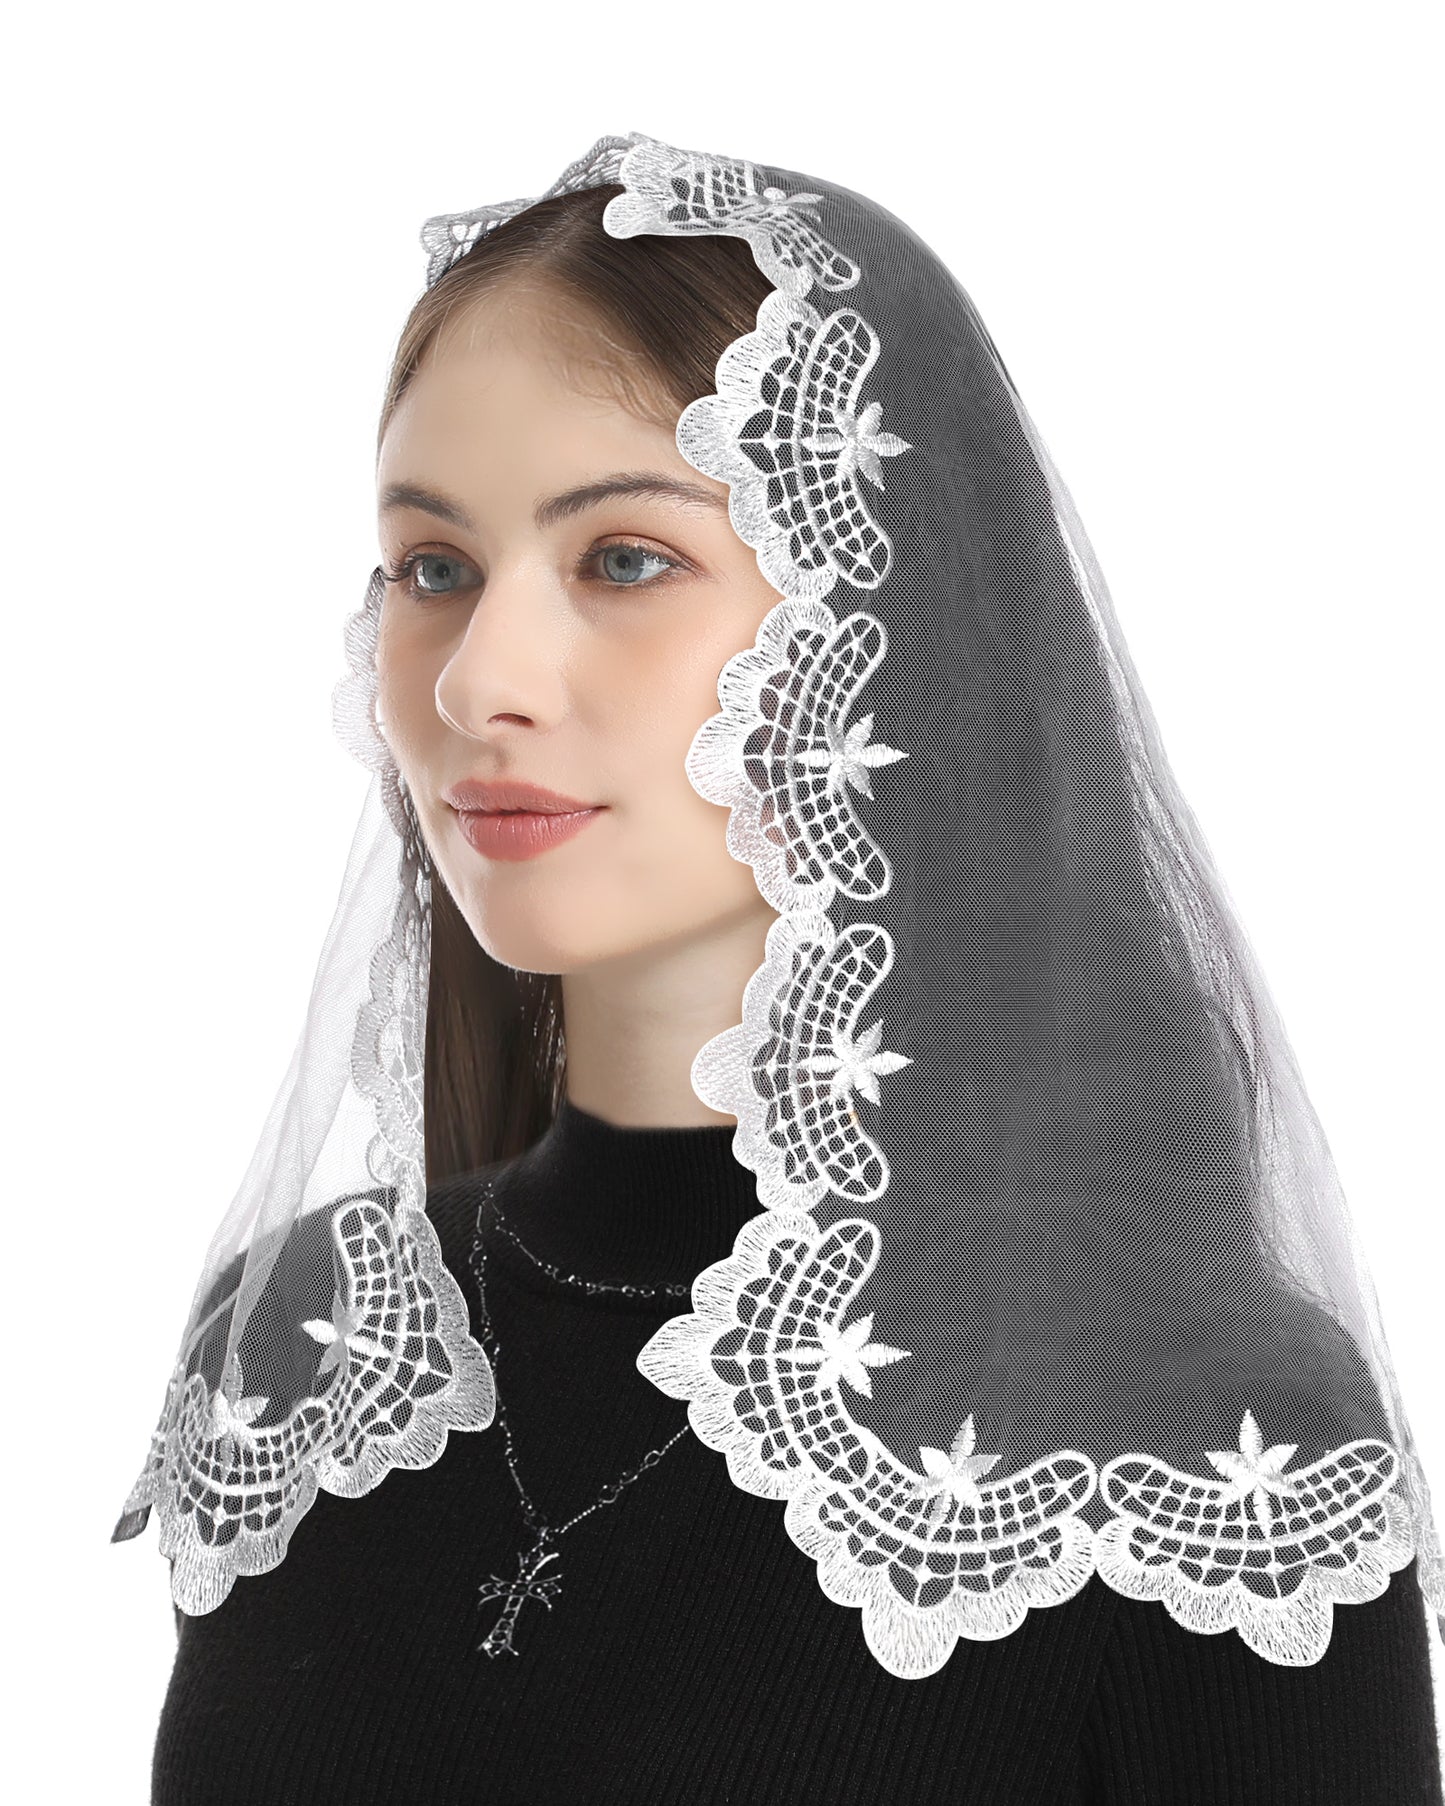 Bozidol Chapel Veils Catholic Mass Mantilla - Virgin and Child Embroidery Lace Triangle Head Coverings Floral Church Veil White